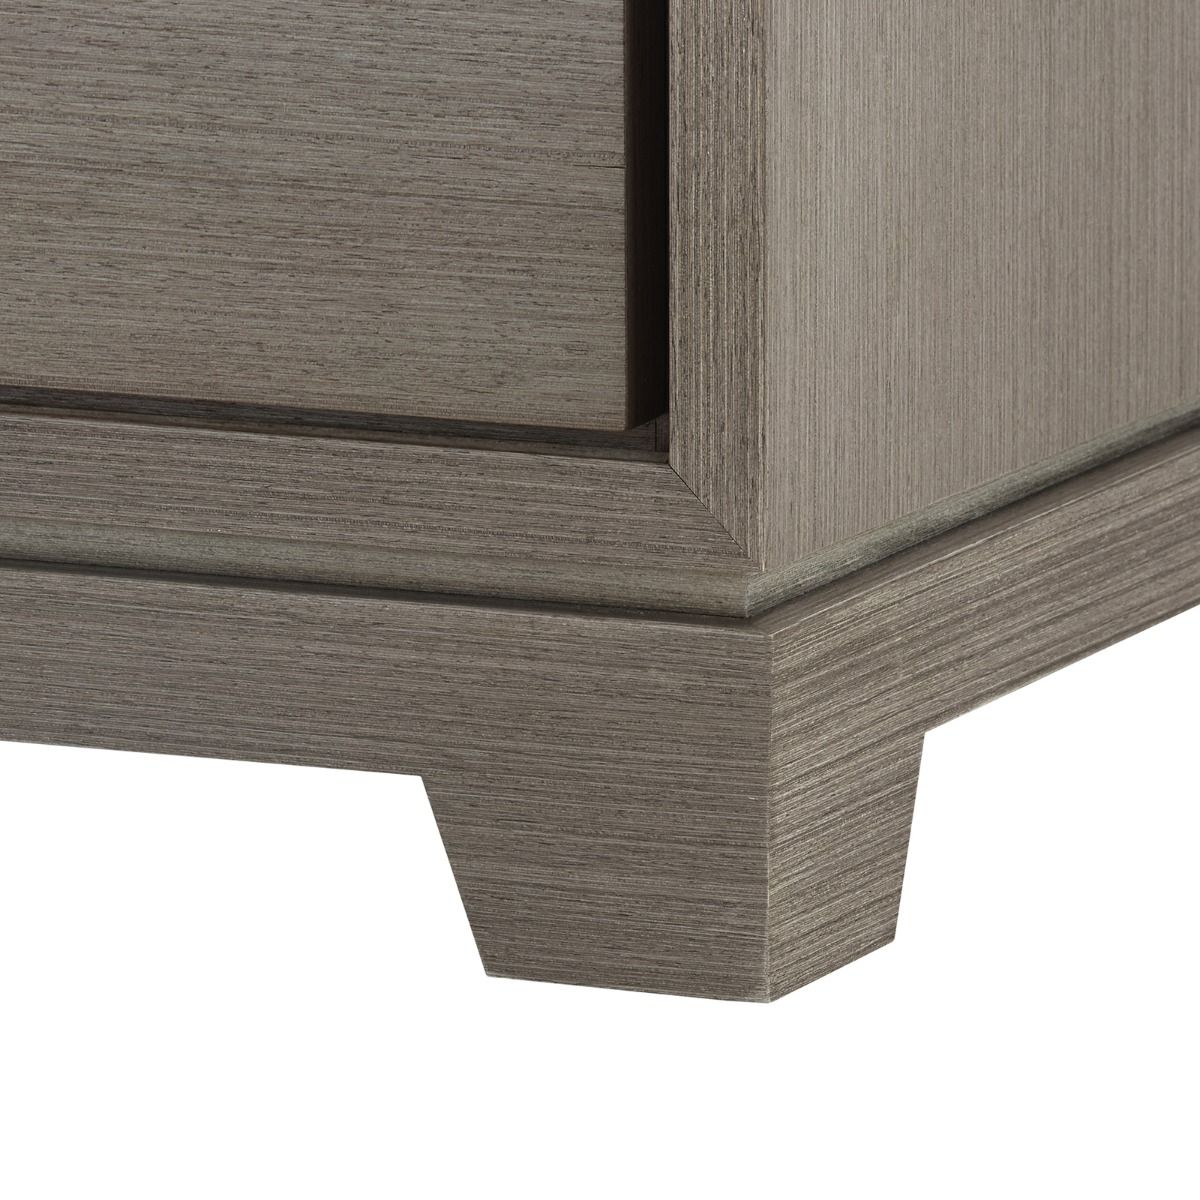 Harrison Extra Large  6 Drawer Taupe Grey and Brass Dresser